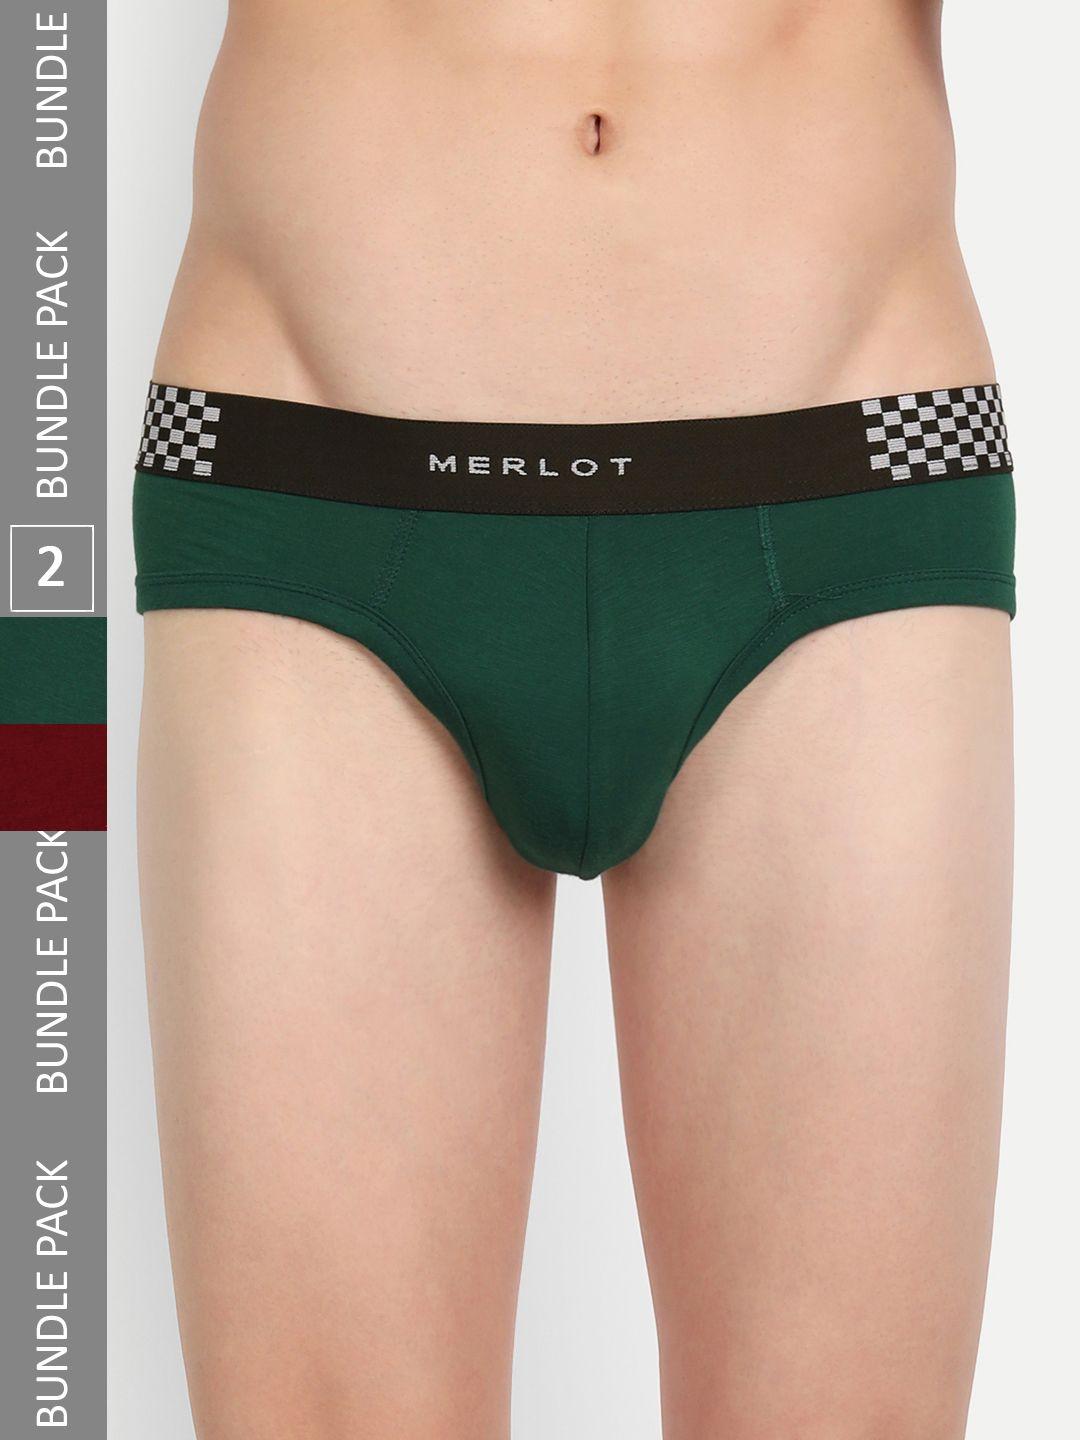 merlot men pack of 2 assorted printed ultra-soft & smooth anti bacterial basic briefs